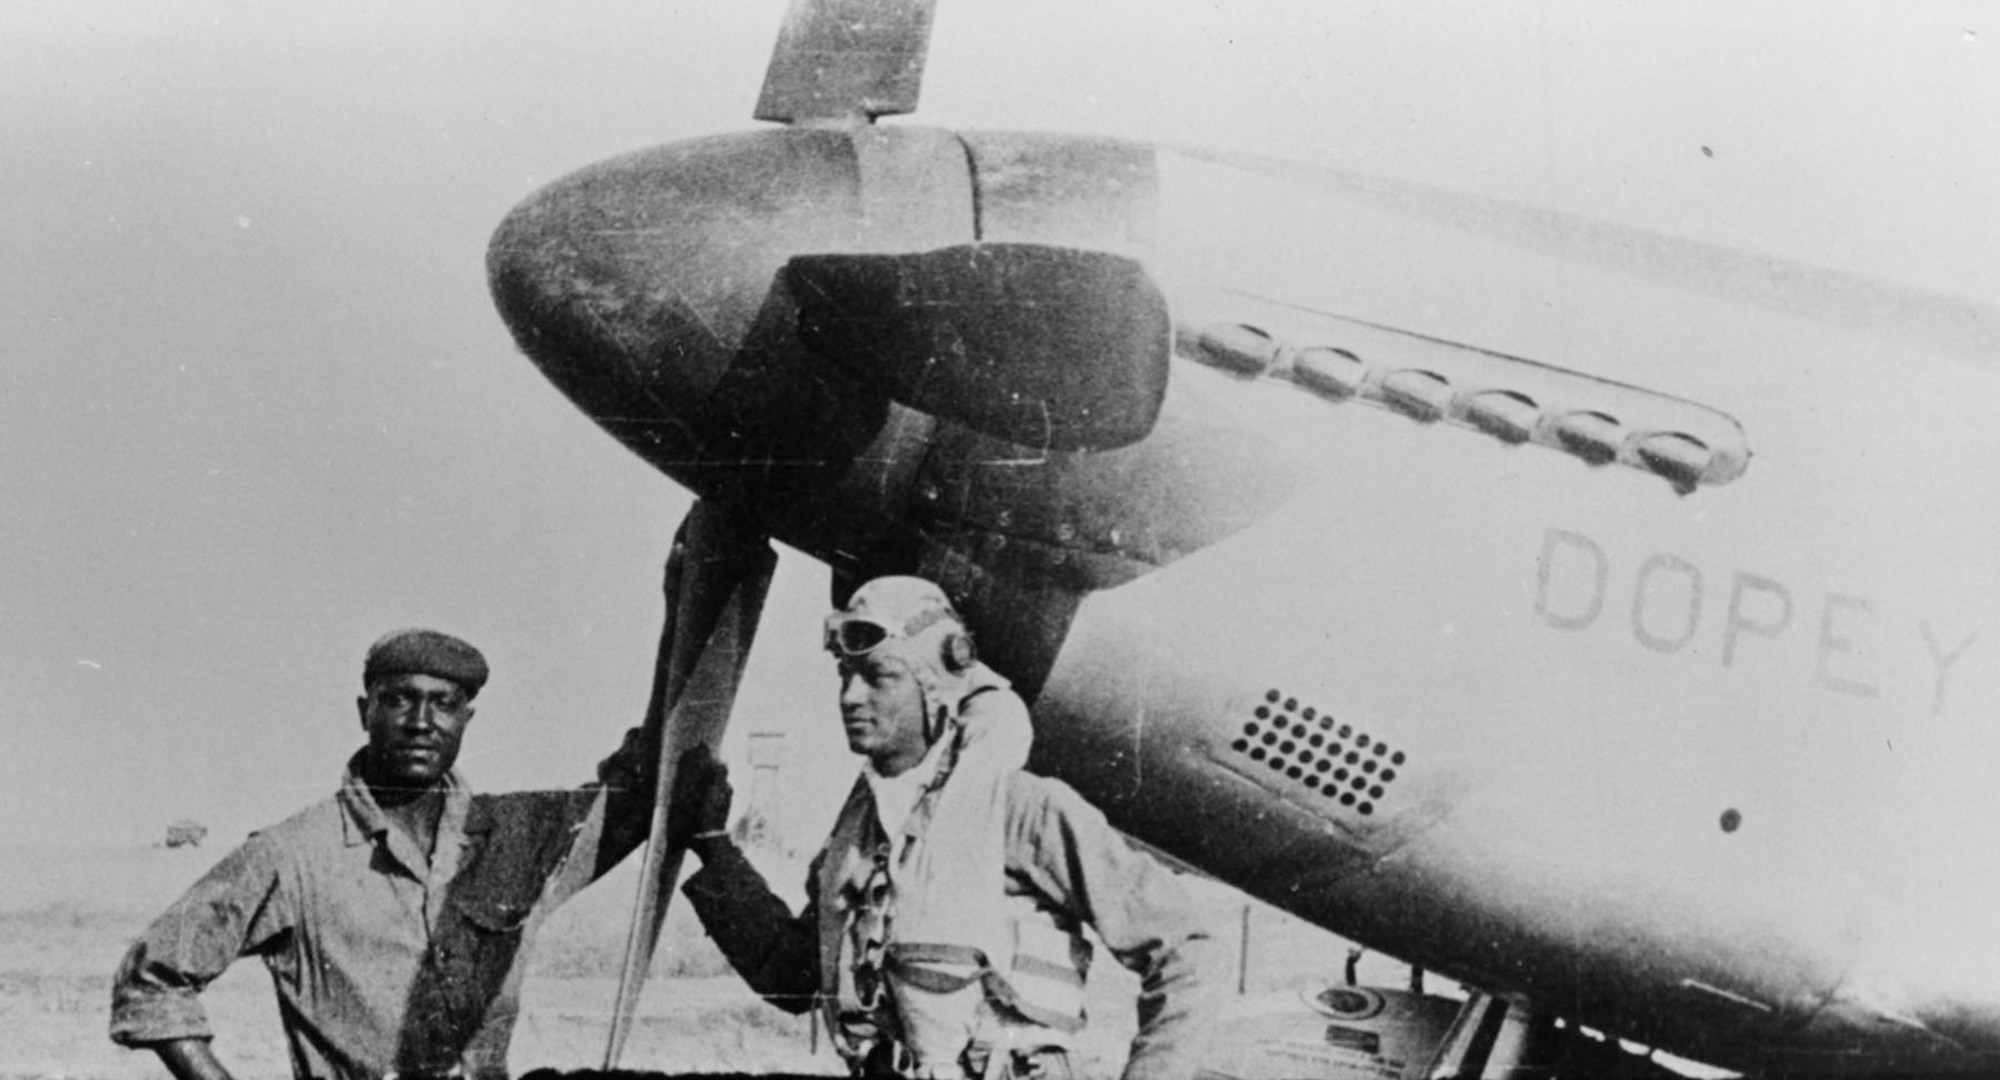 1st Lt. Walter Westmoreland with his P-51C nicknamed Dopey. A member of the 302nd Fighter Squadron, he was shot down by enemy ground fire near Lake Balaton, Hungary, in October 1944 while returning from an escort mission to Blechhammer, Germany. (U.S. Air Force photo)